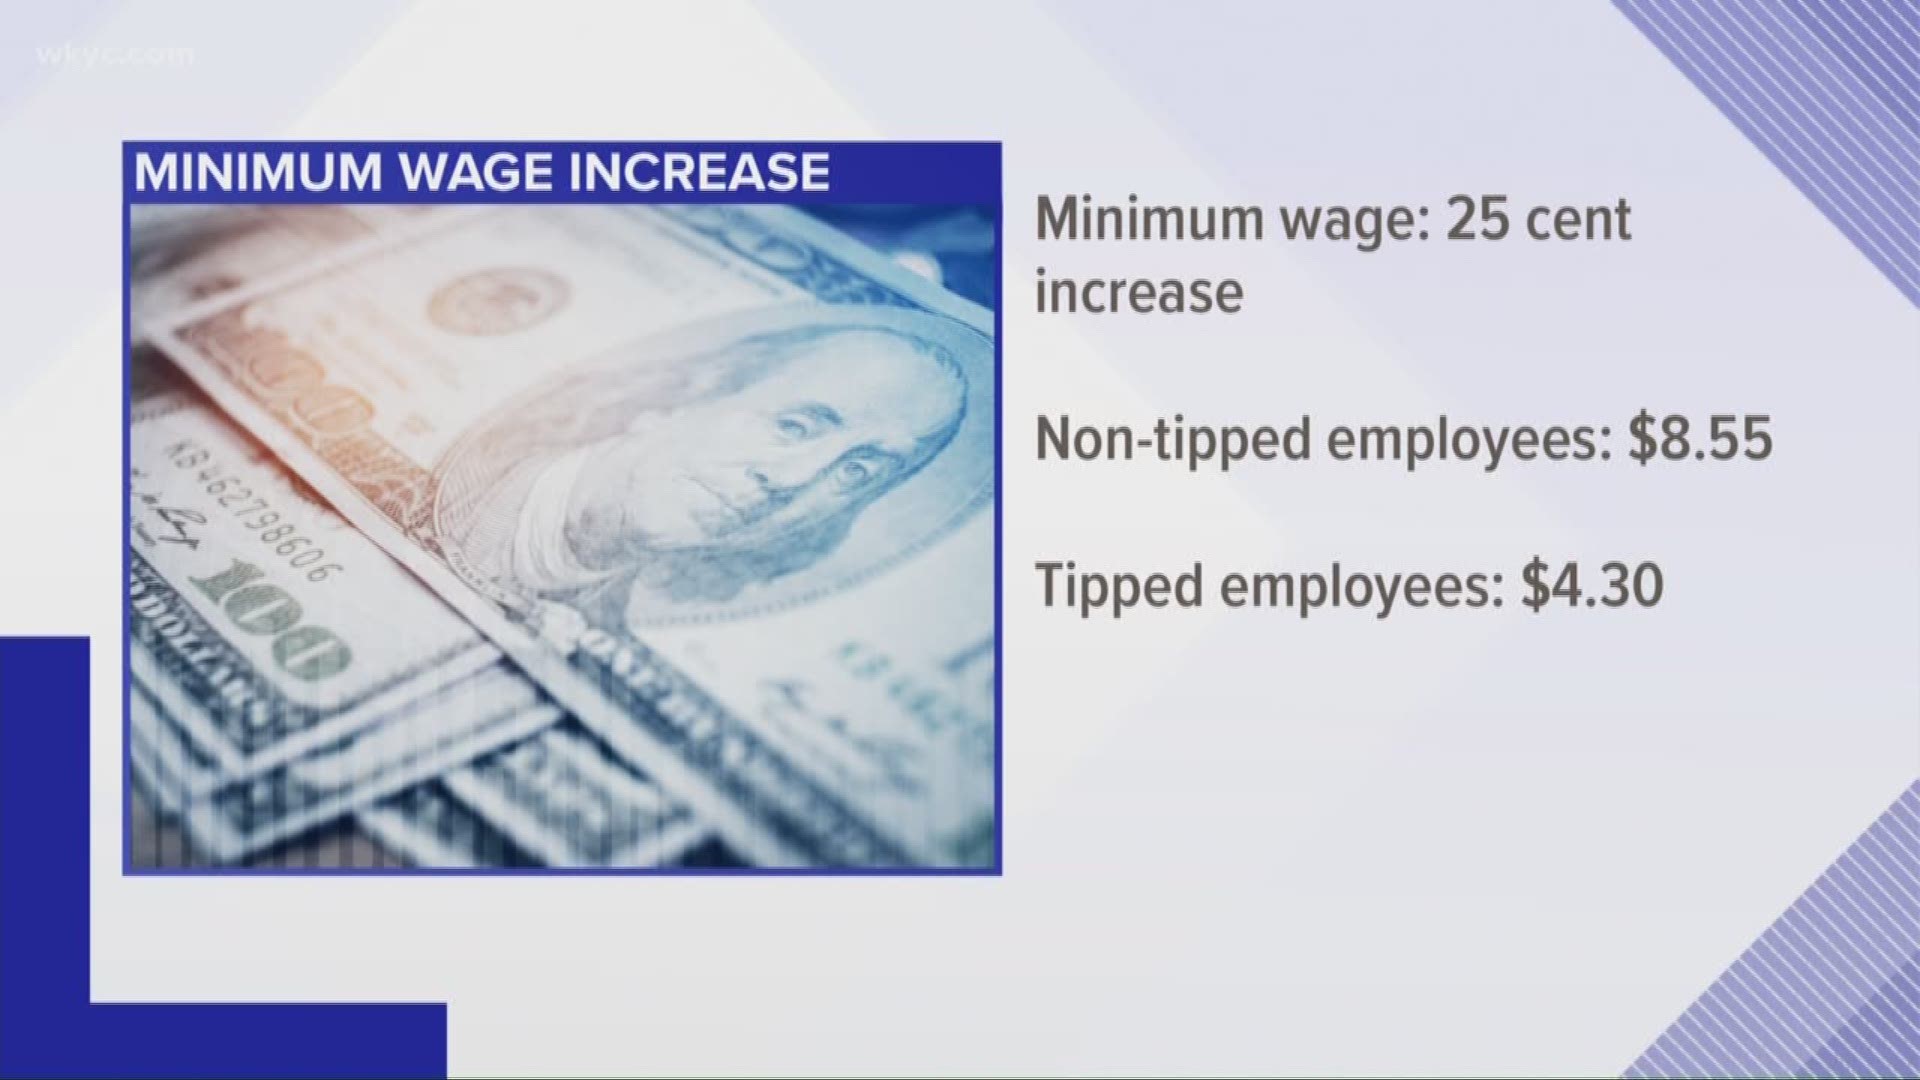 A new year will mean new laws in Ohio, plus an increase in minimum wage